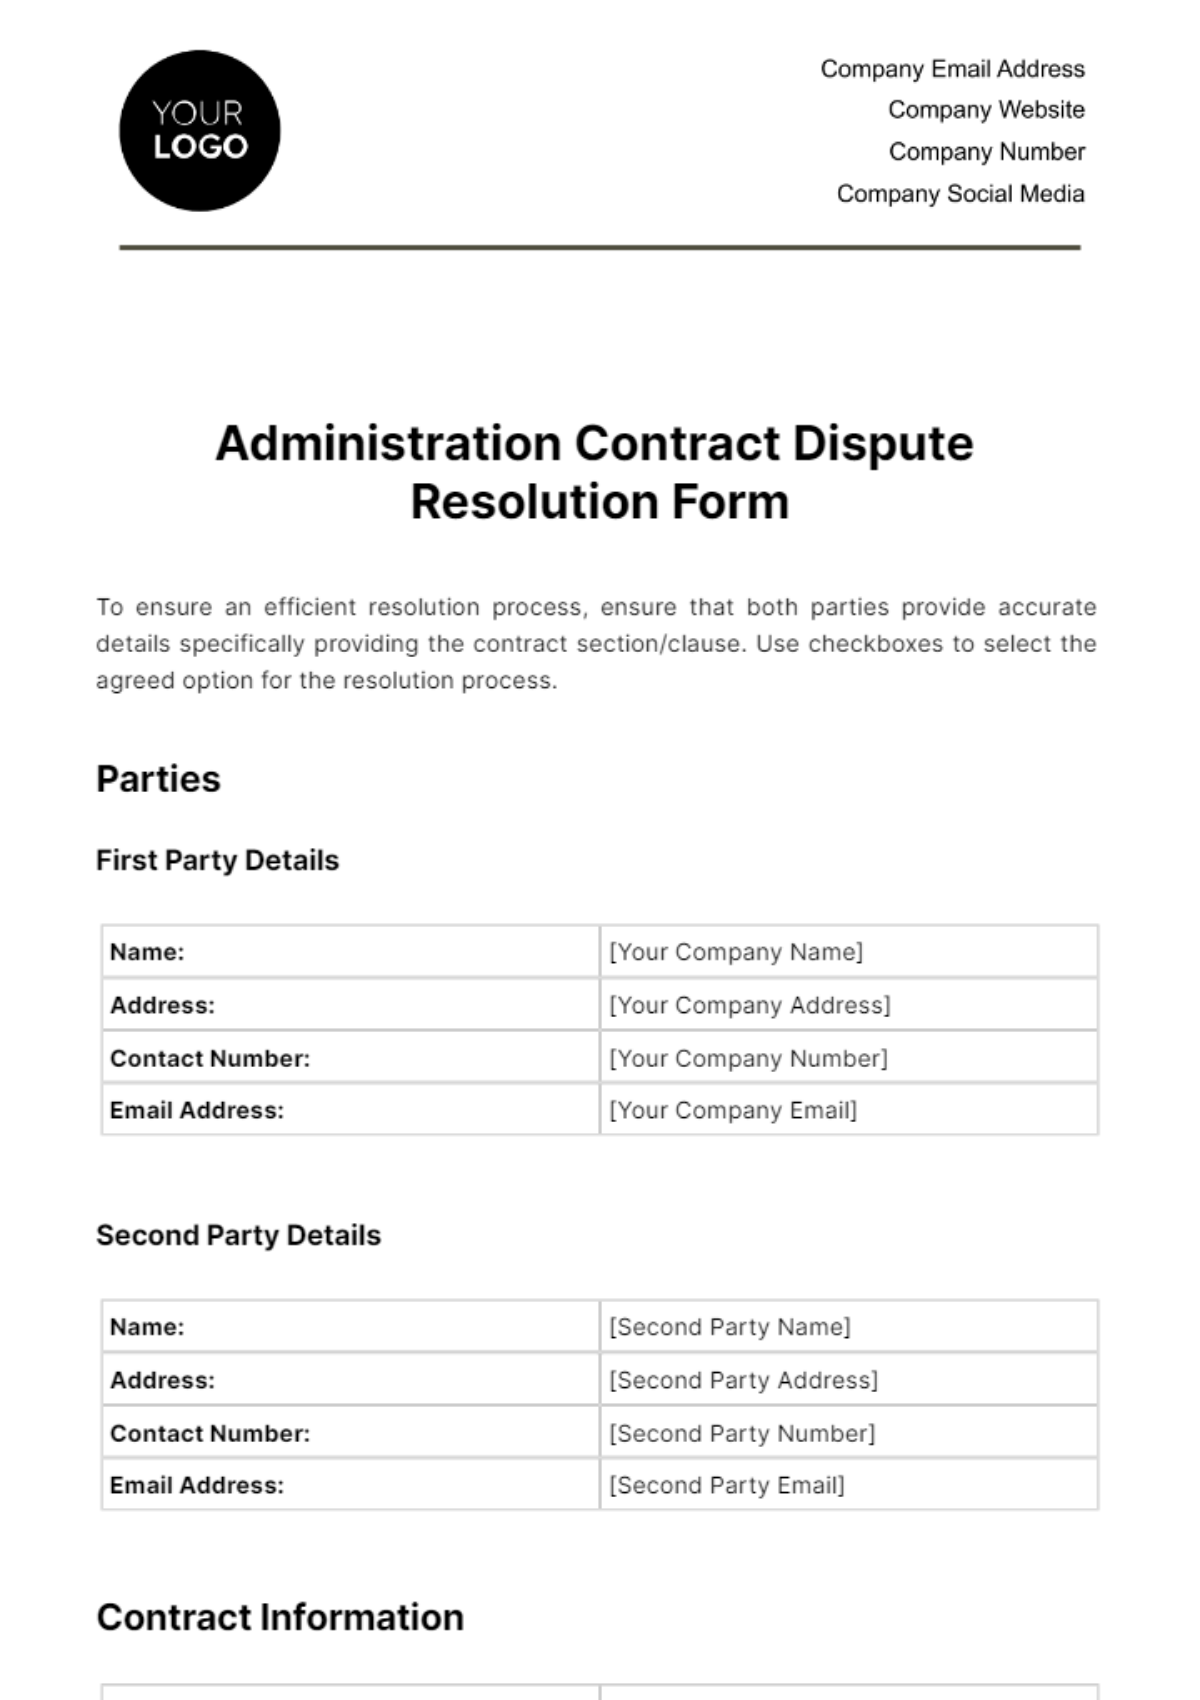 Free Administration Contract Dispute Resolution Form Template